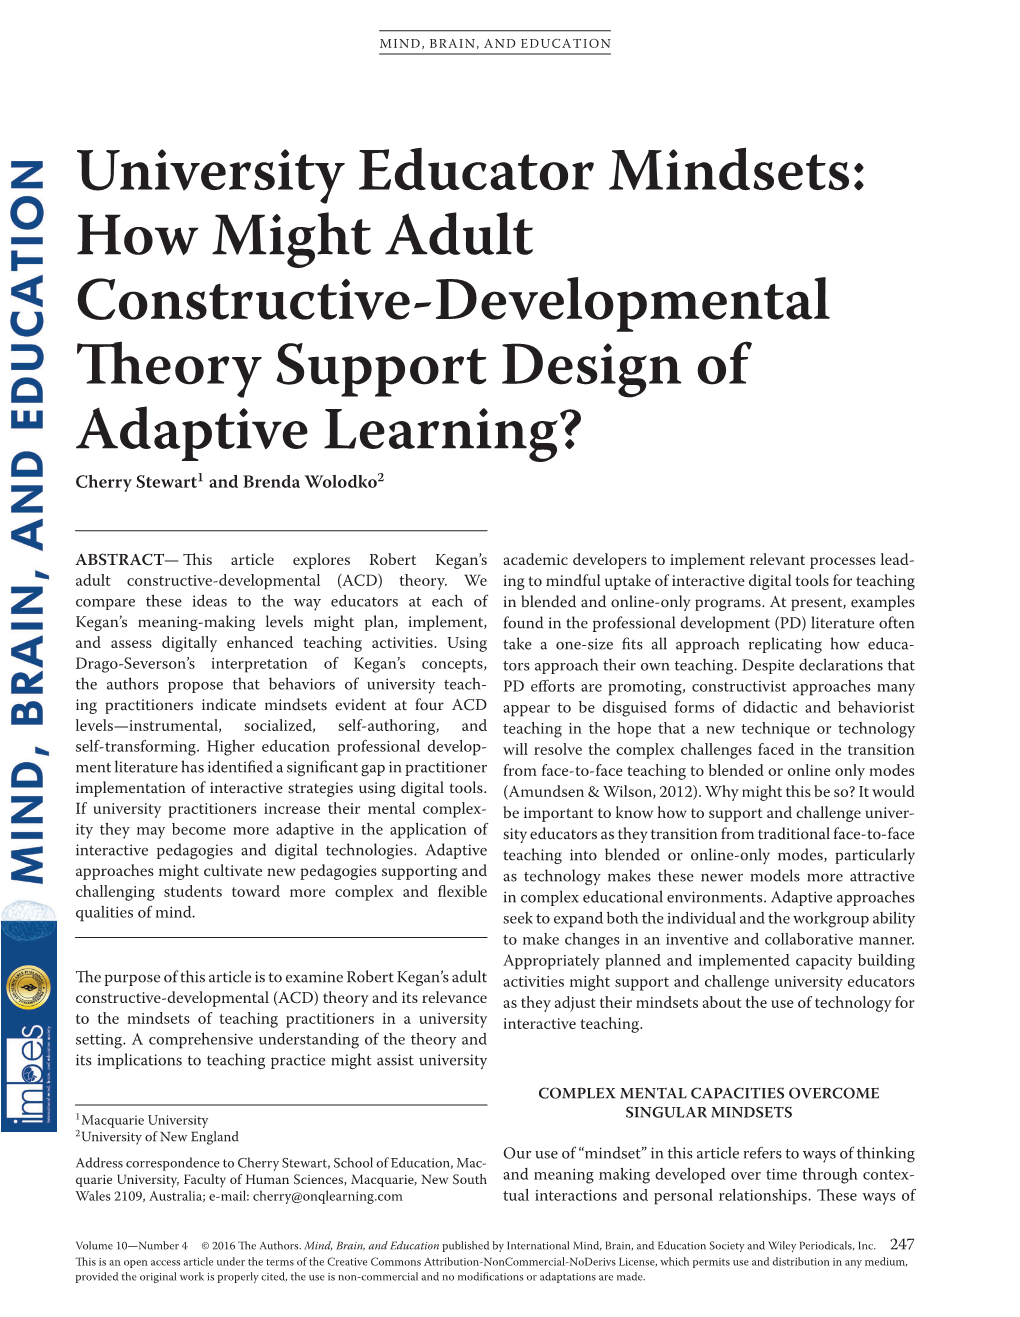 How Might Adult Constructive-Developmental Theory Support Design of Adaptive Learning? Cherry Stewart1 and Brenda Wolodko2